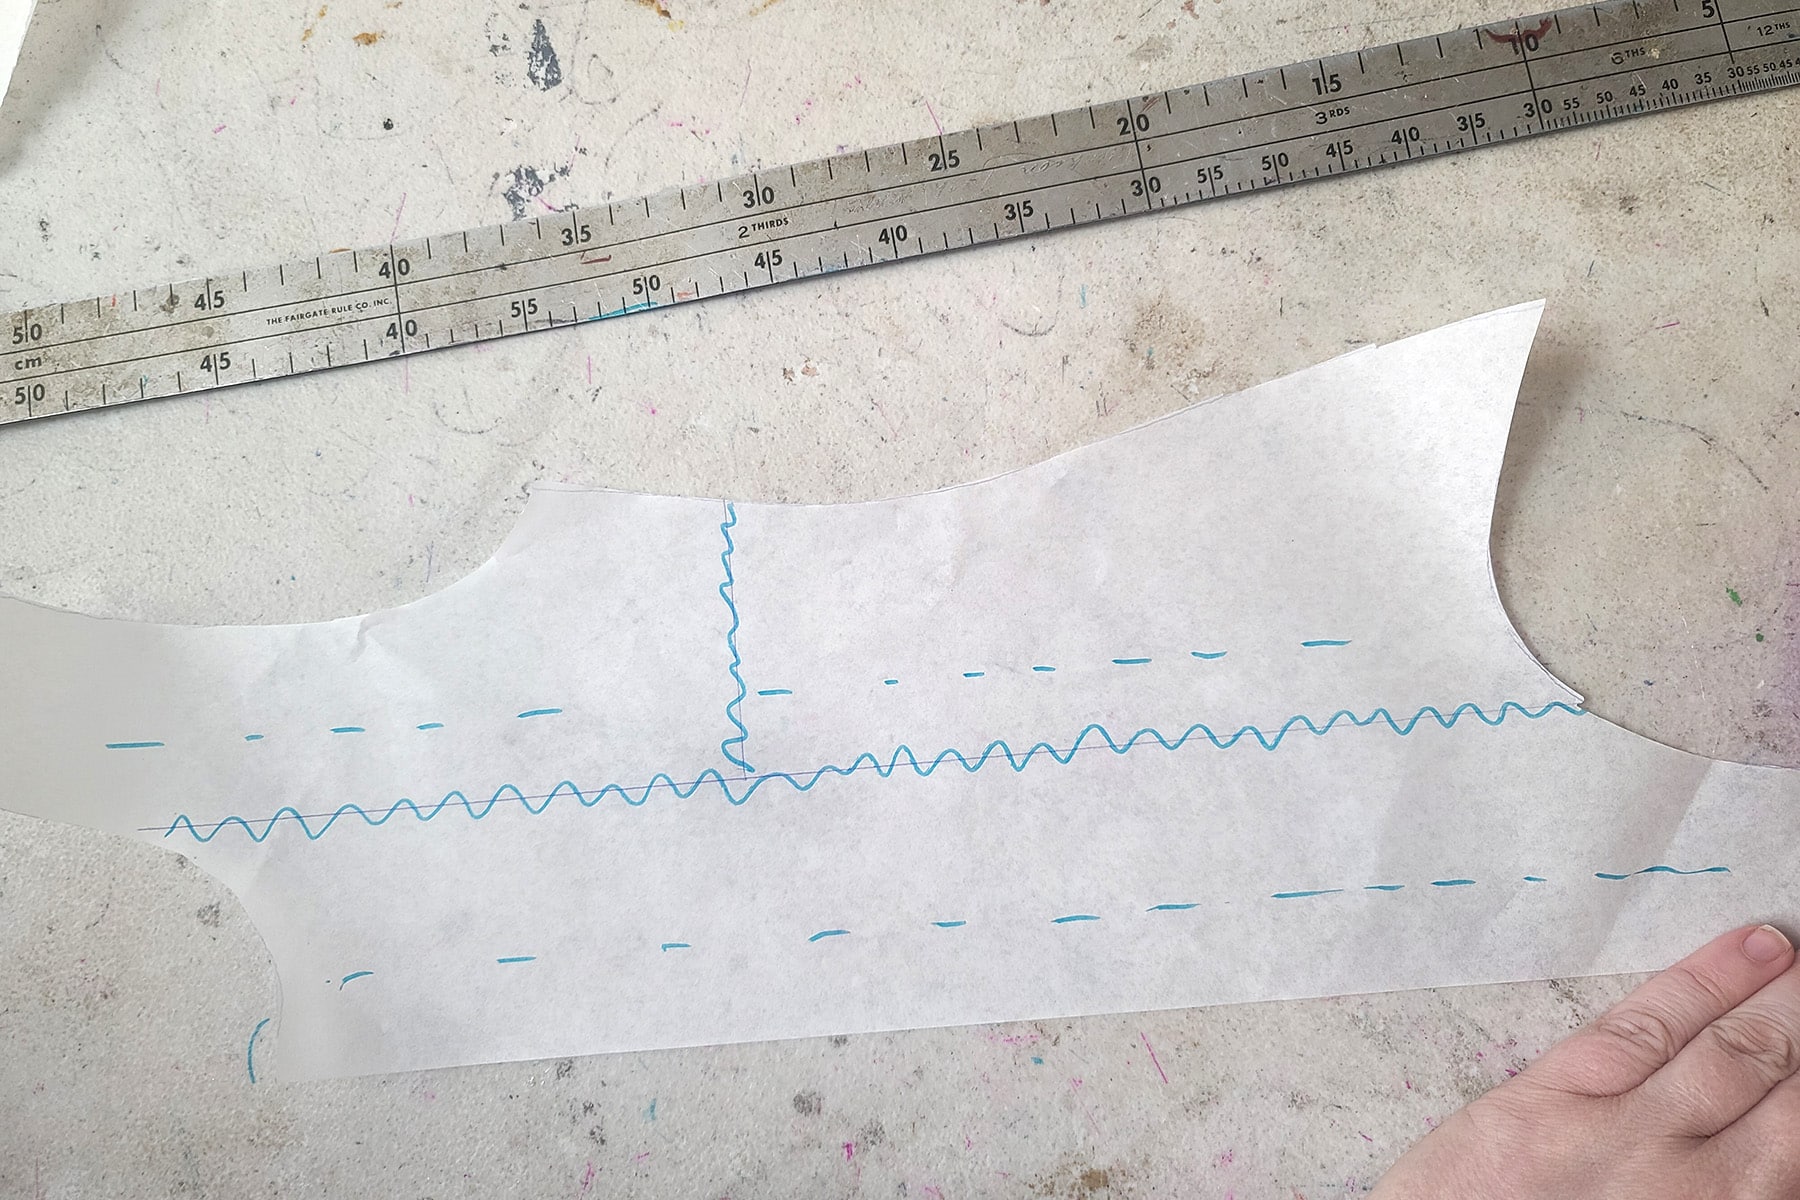 The leotard pattern piece now has a bright blue wavy line drawn over each of the design lines that divided it into 3 sections.